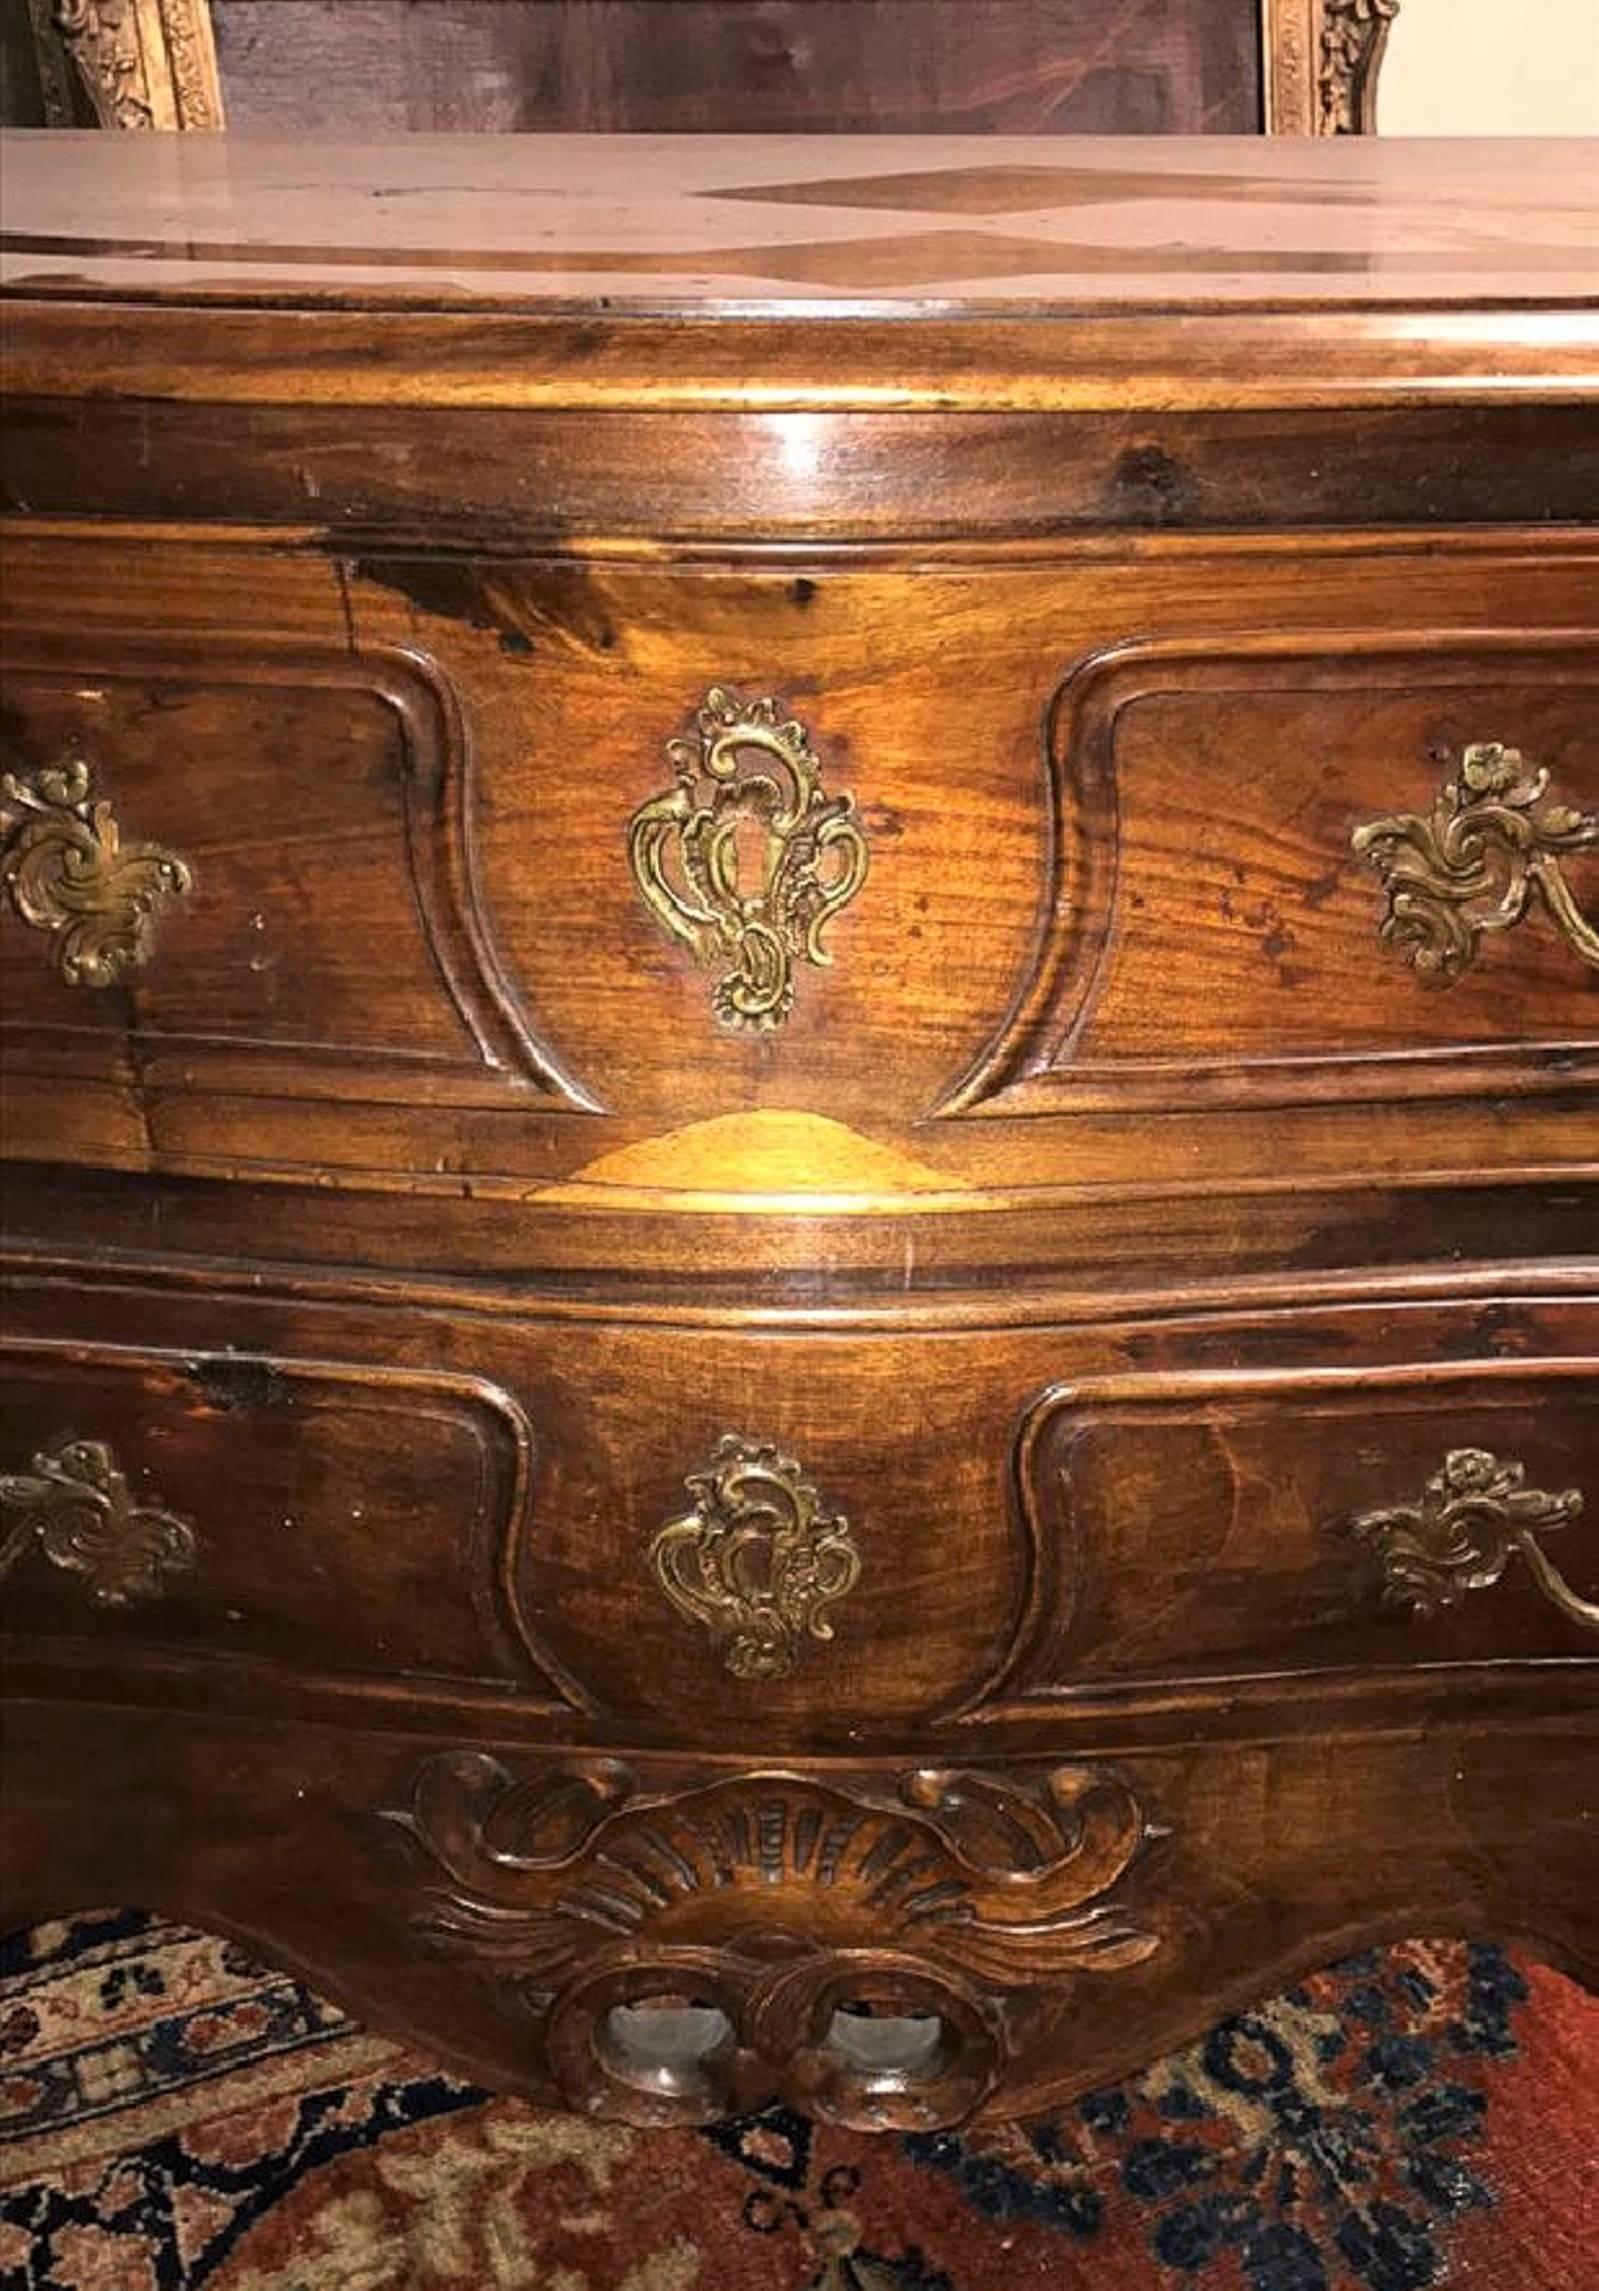 Superb early 19th century French Louis XV style hand-crafted walnut commode. The serpentine shaped top above two drawers with fancy bronze pulls and escutcheons. The carved shell motif skirt flows smoothly to cabriole form legs that terminate in a